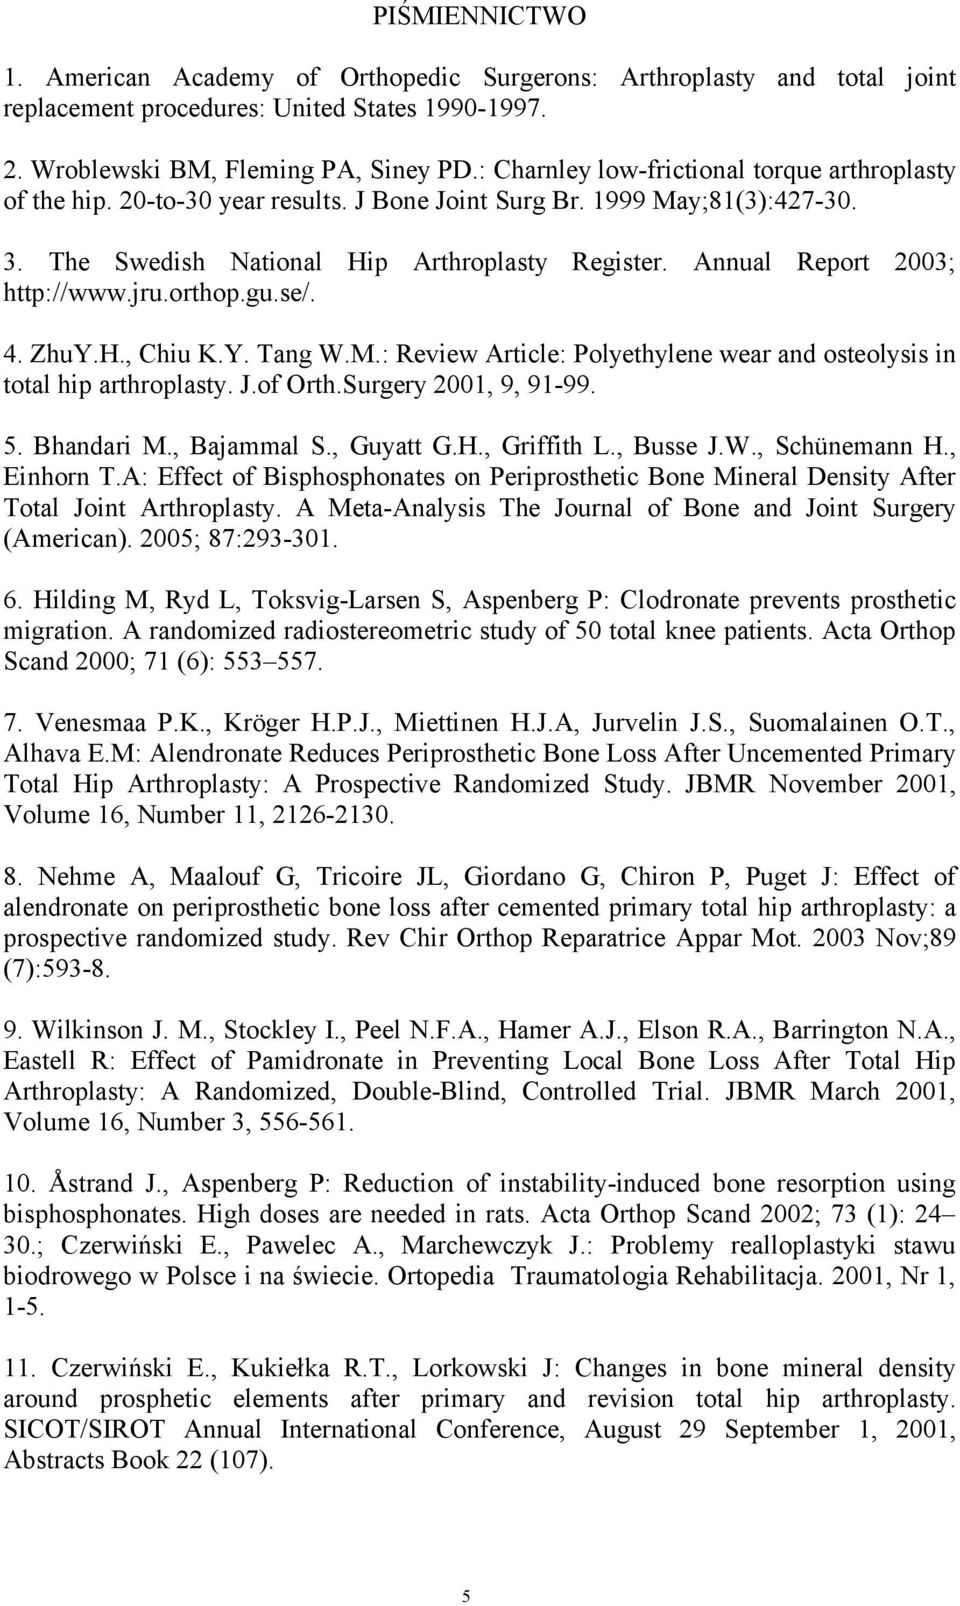 Annual Report 2003; http://www.jru.orthop.gu.se/. 4. ZhuY.H., Chiu K.Y. Tang W.M.: Review Article: Polyethylene wear and osteolysis in total hip arthroplasty. J.of Orth.Surgery 2001, 9, 91-99. 5.